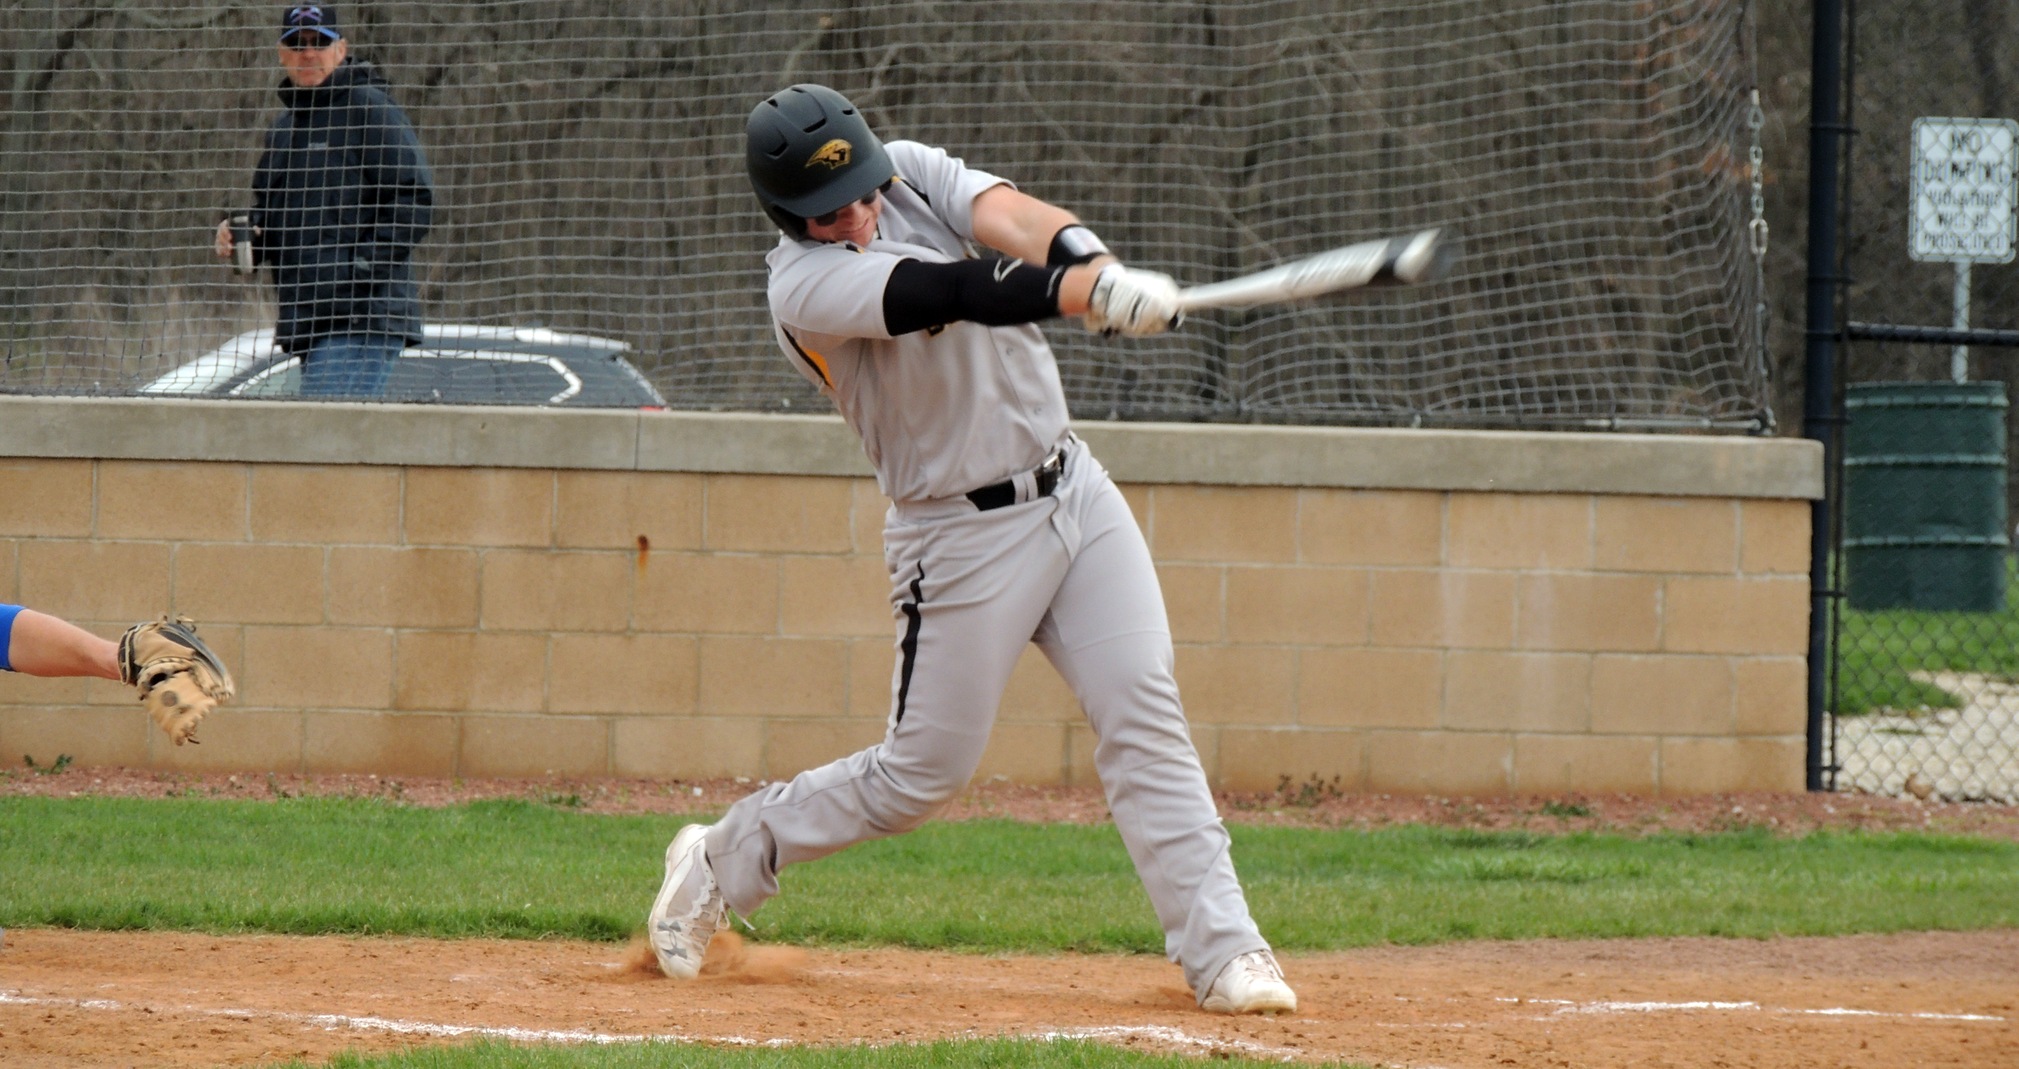 Andy Brahier drove in two runs as the Titans swept the Pioneers.